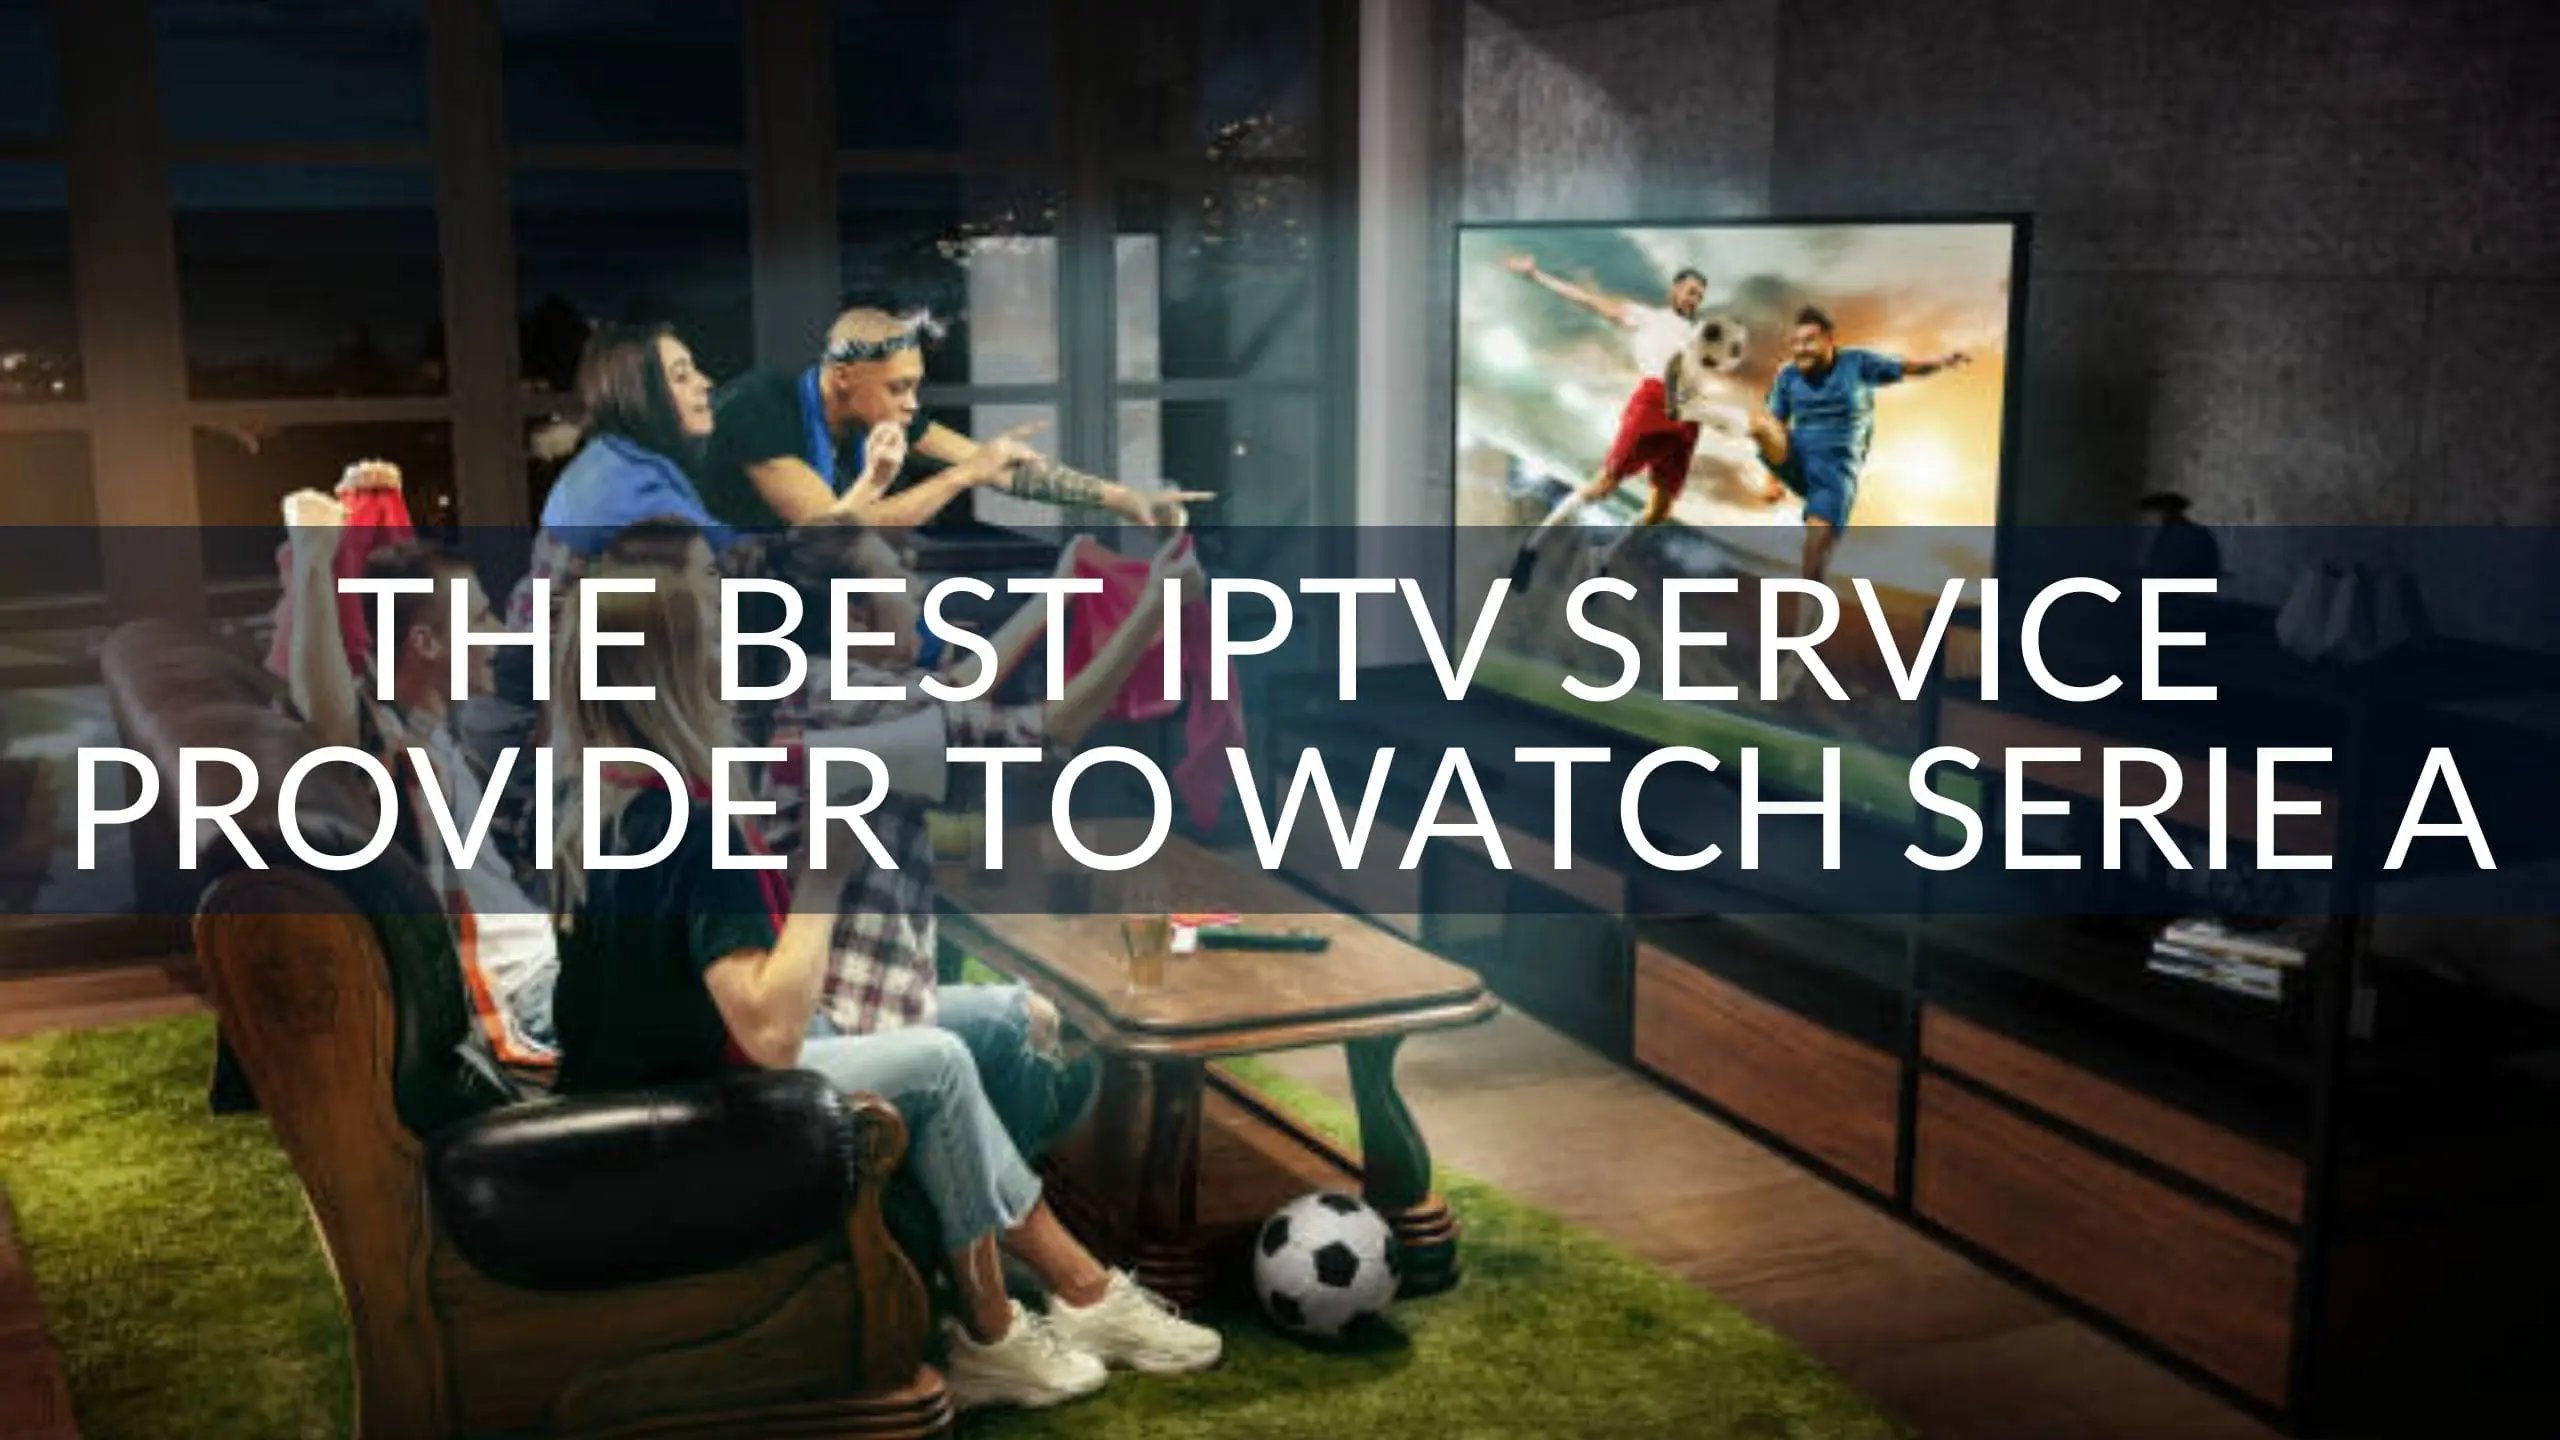 The Best IPTV Service Provider to Watch Serie A